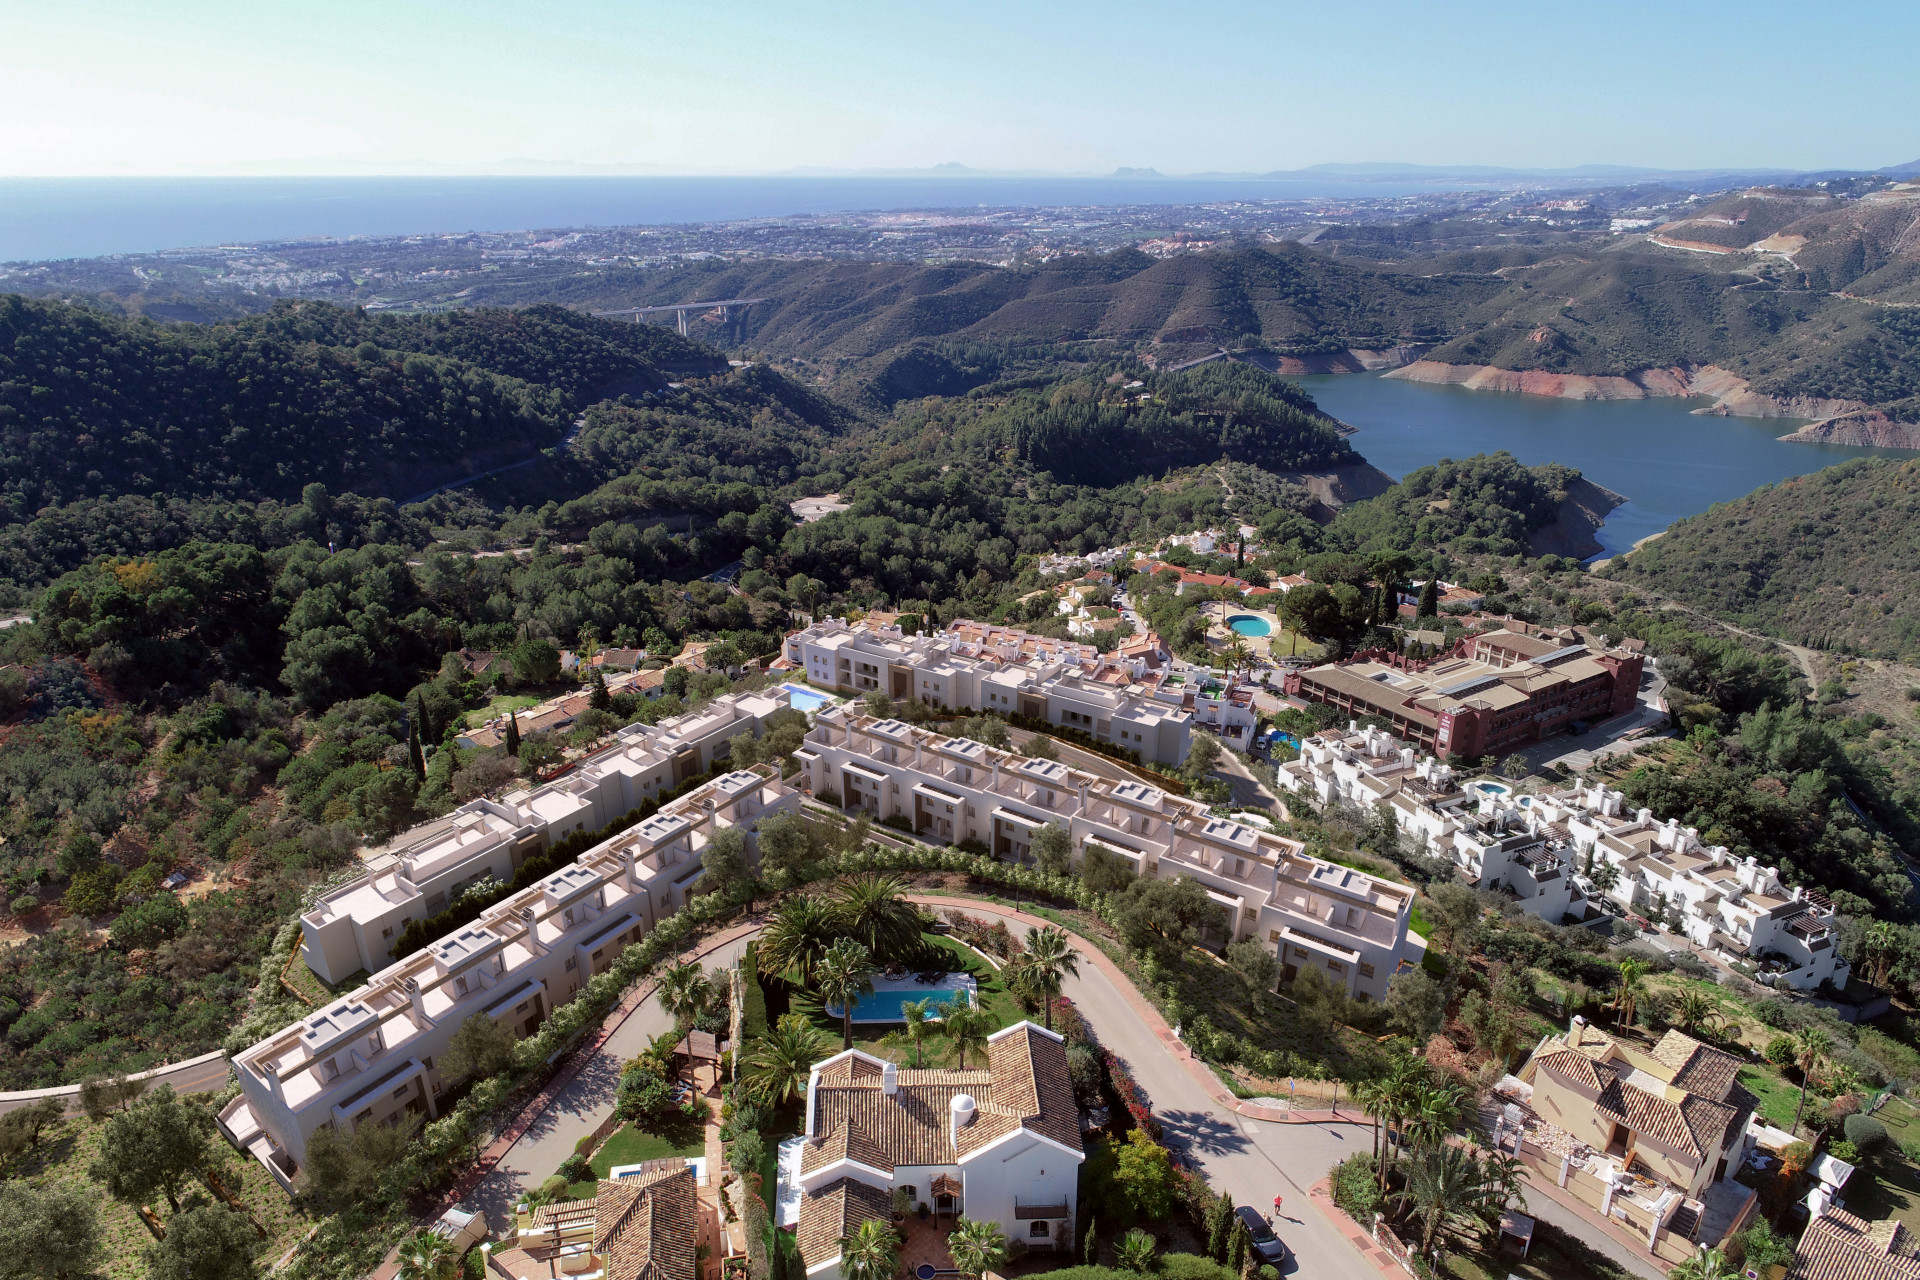 Almazara Hills: Apartments and Penthouses surrounded by nature and close to Marbella | Image 6